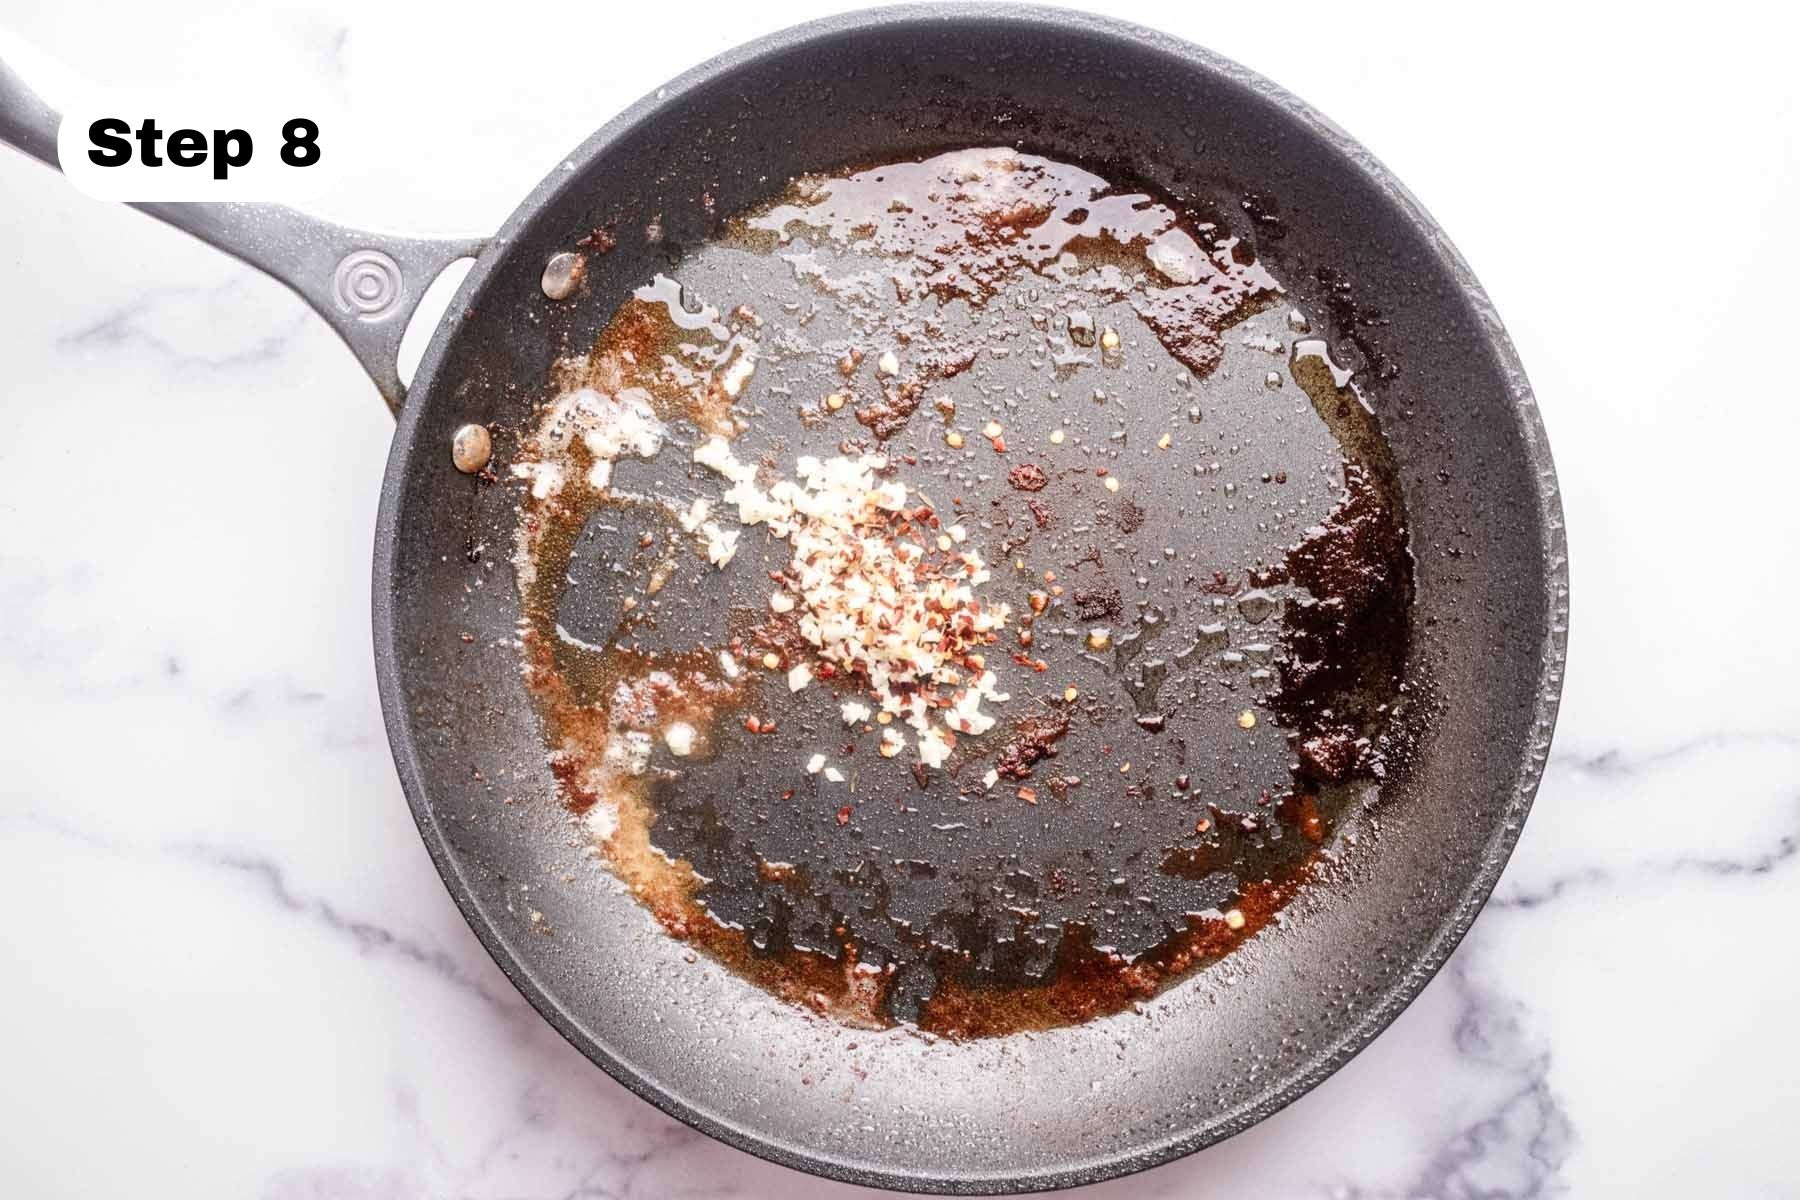 Minced garlic and red pepper flakes in a large skillet.